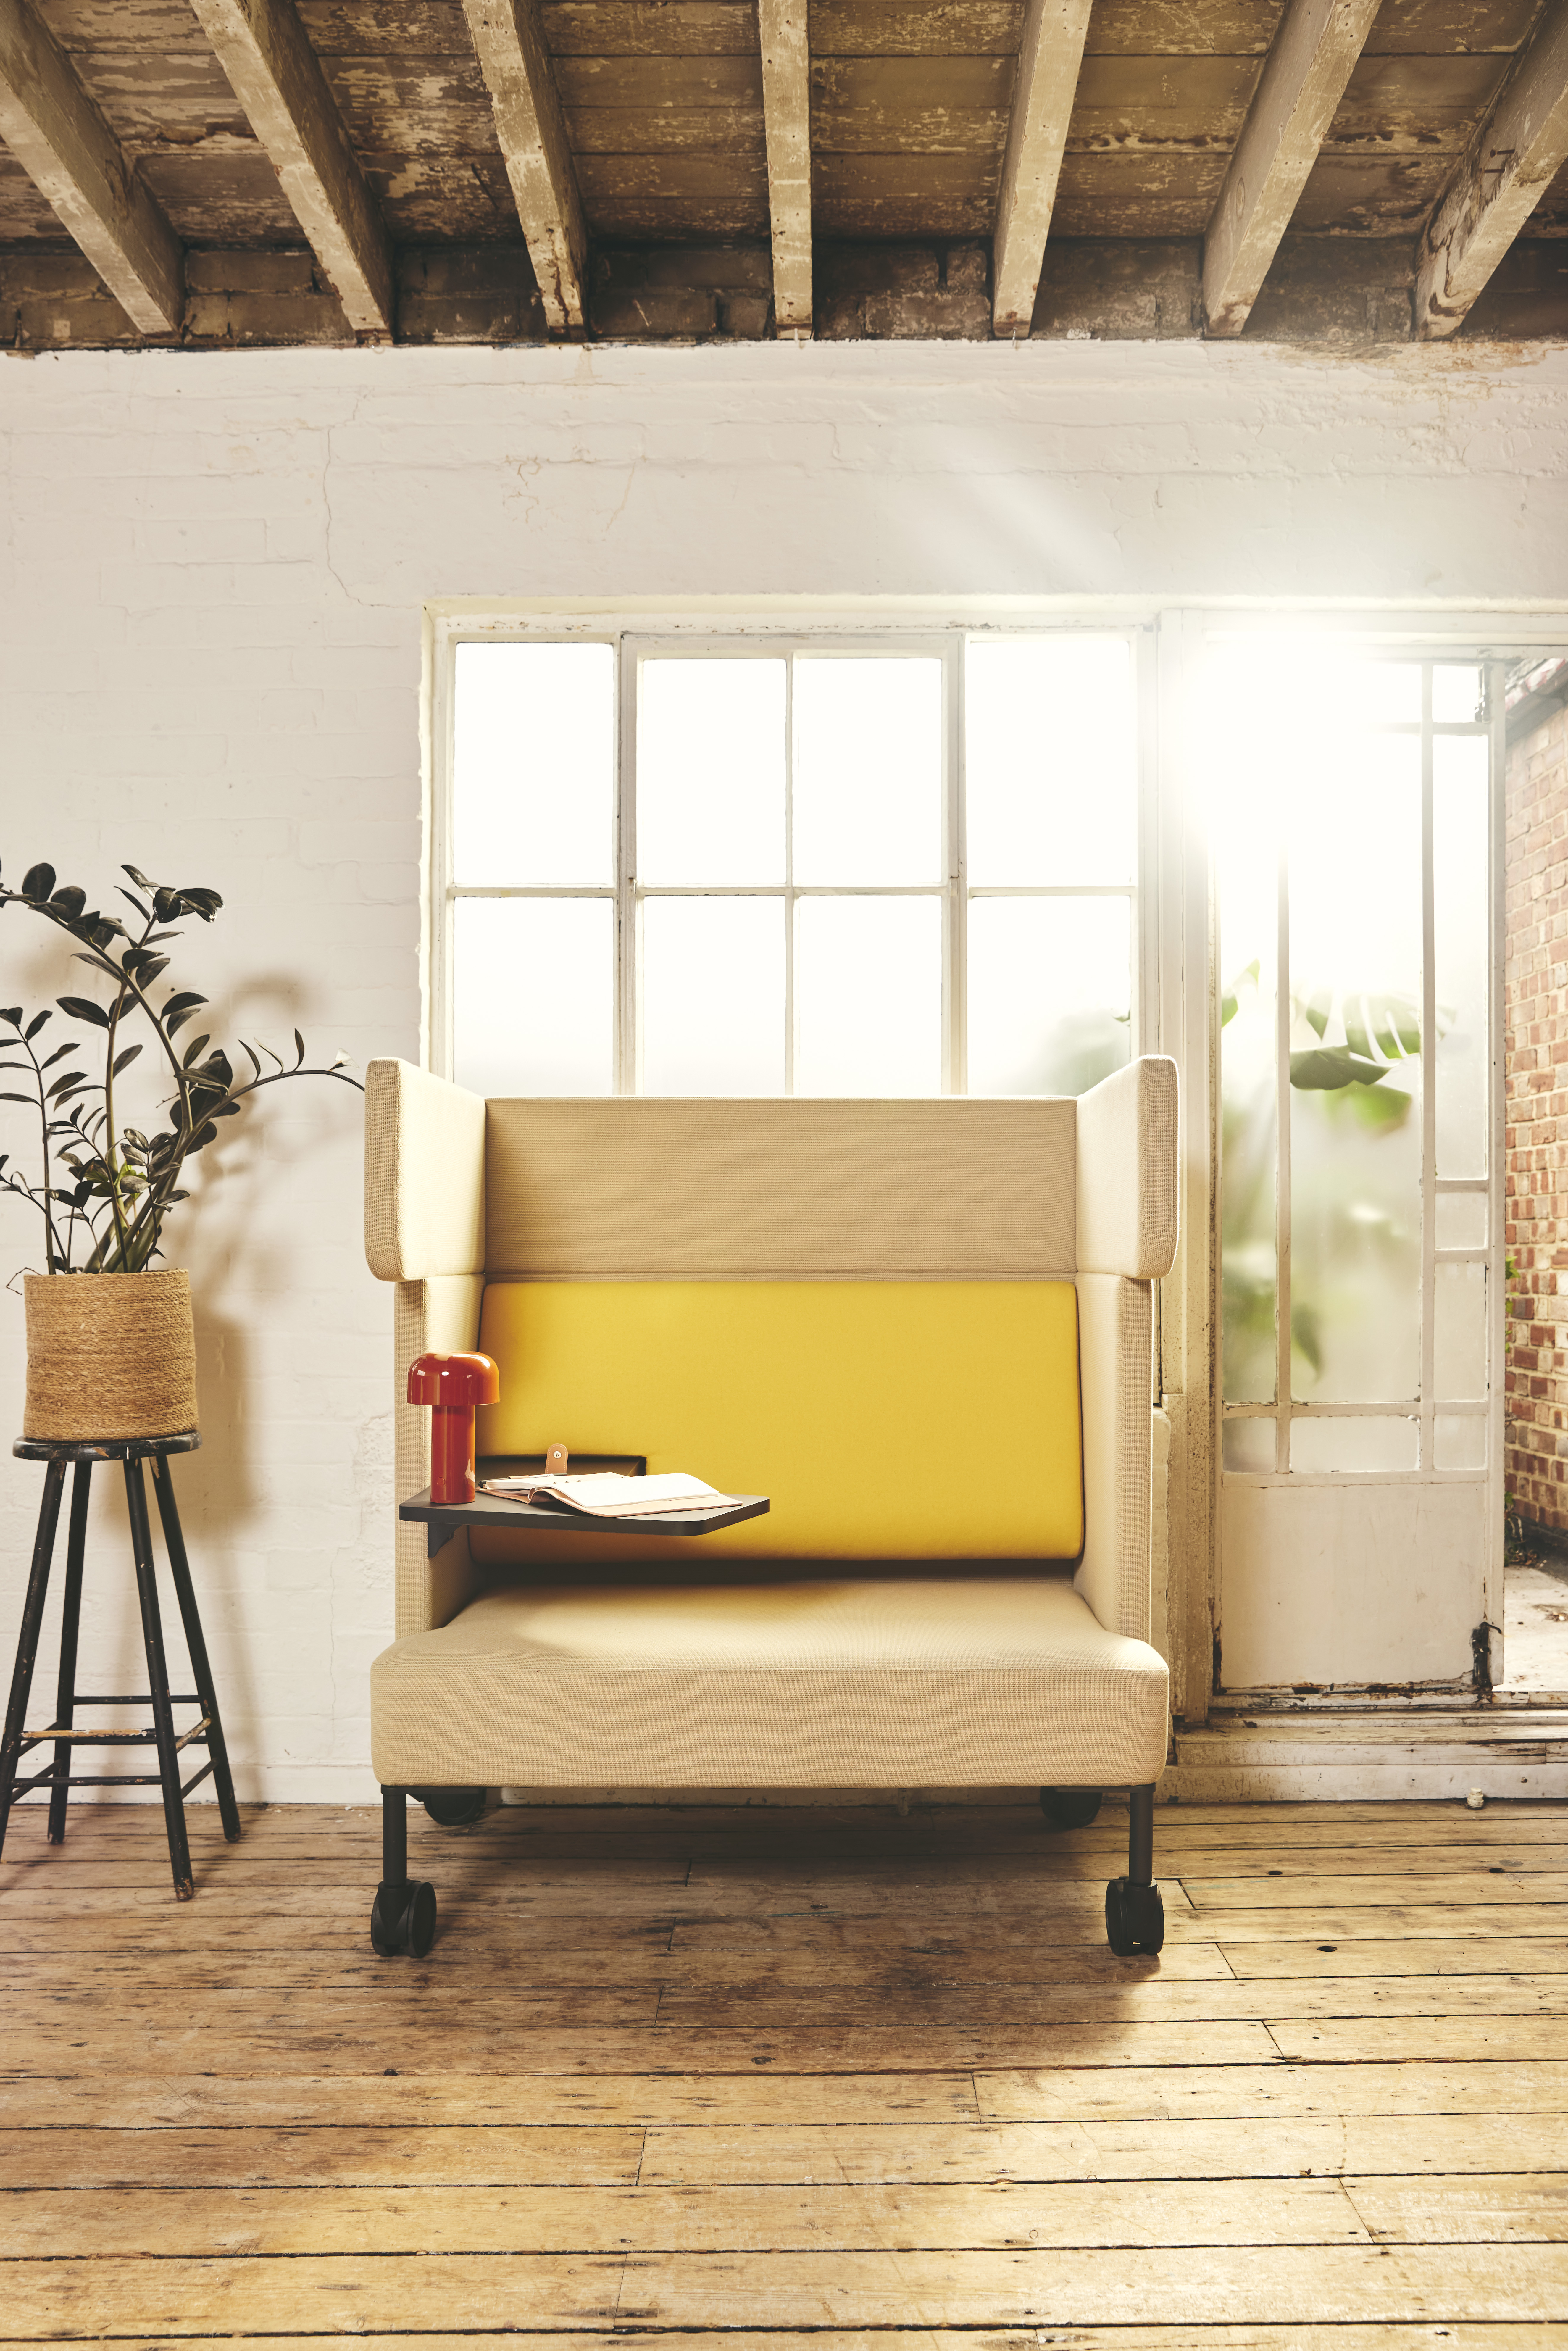 FourUs Solo yellow office sofas in a room with wooden floors.